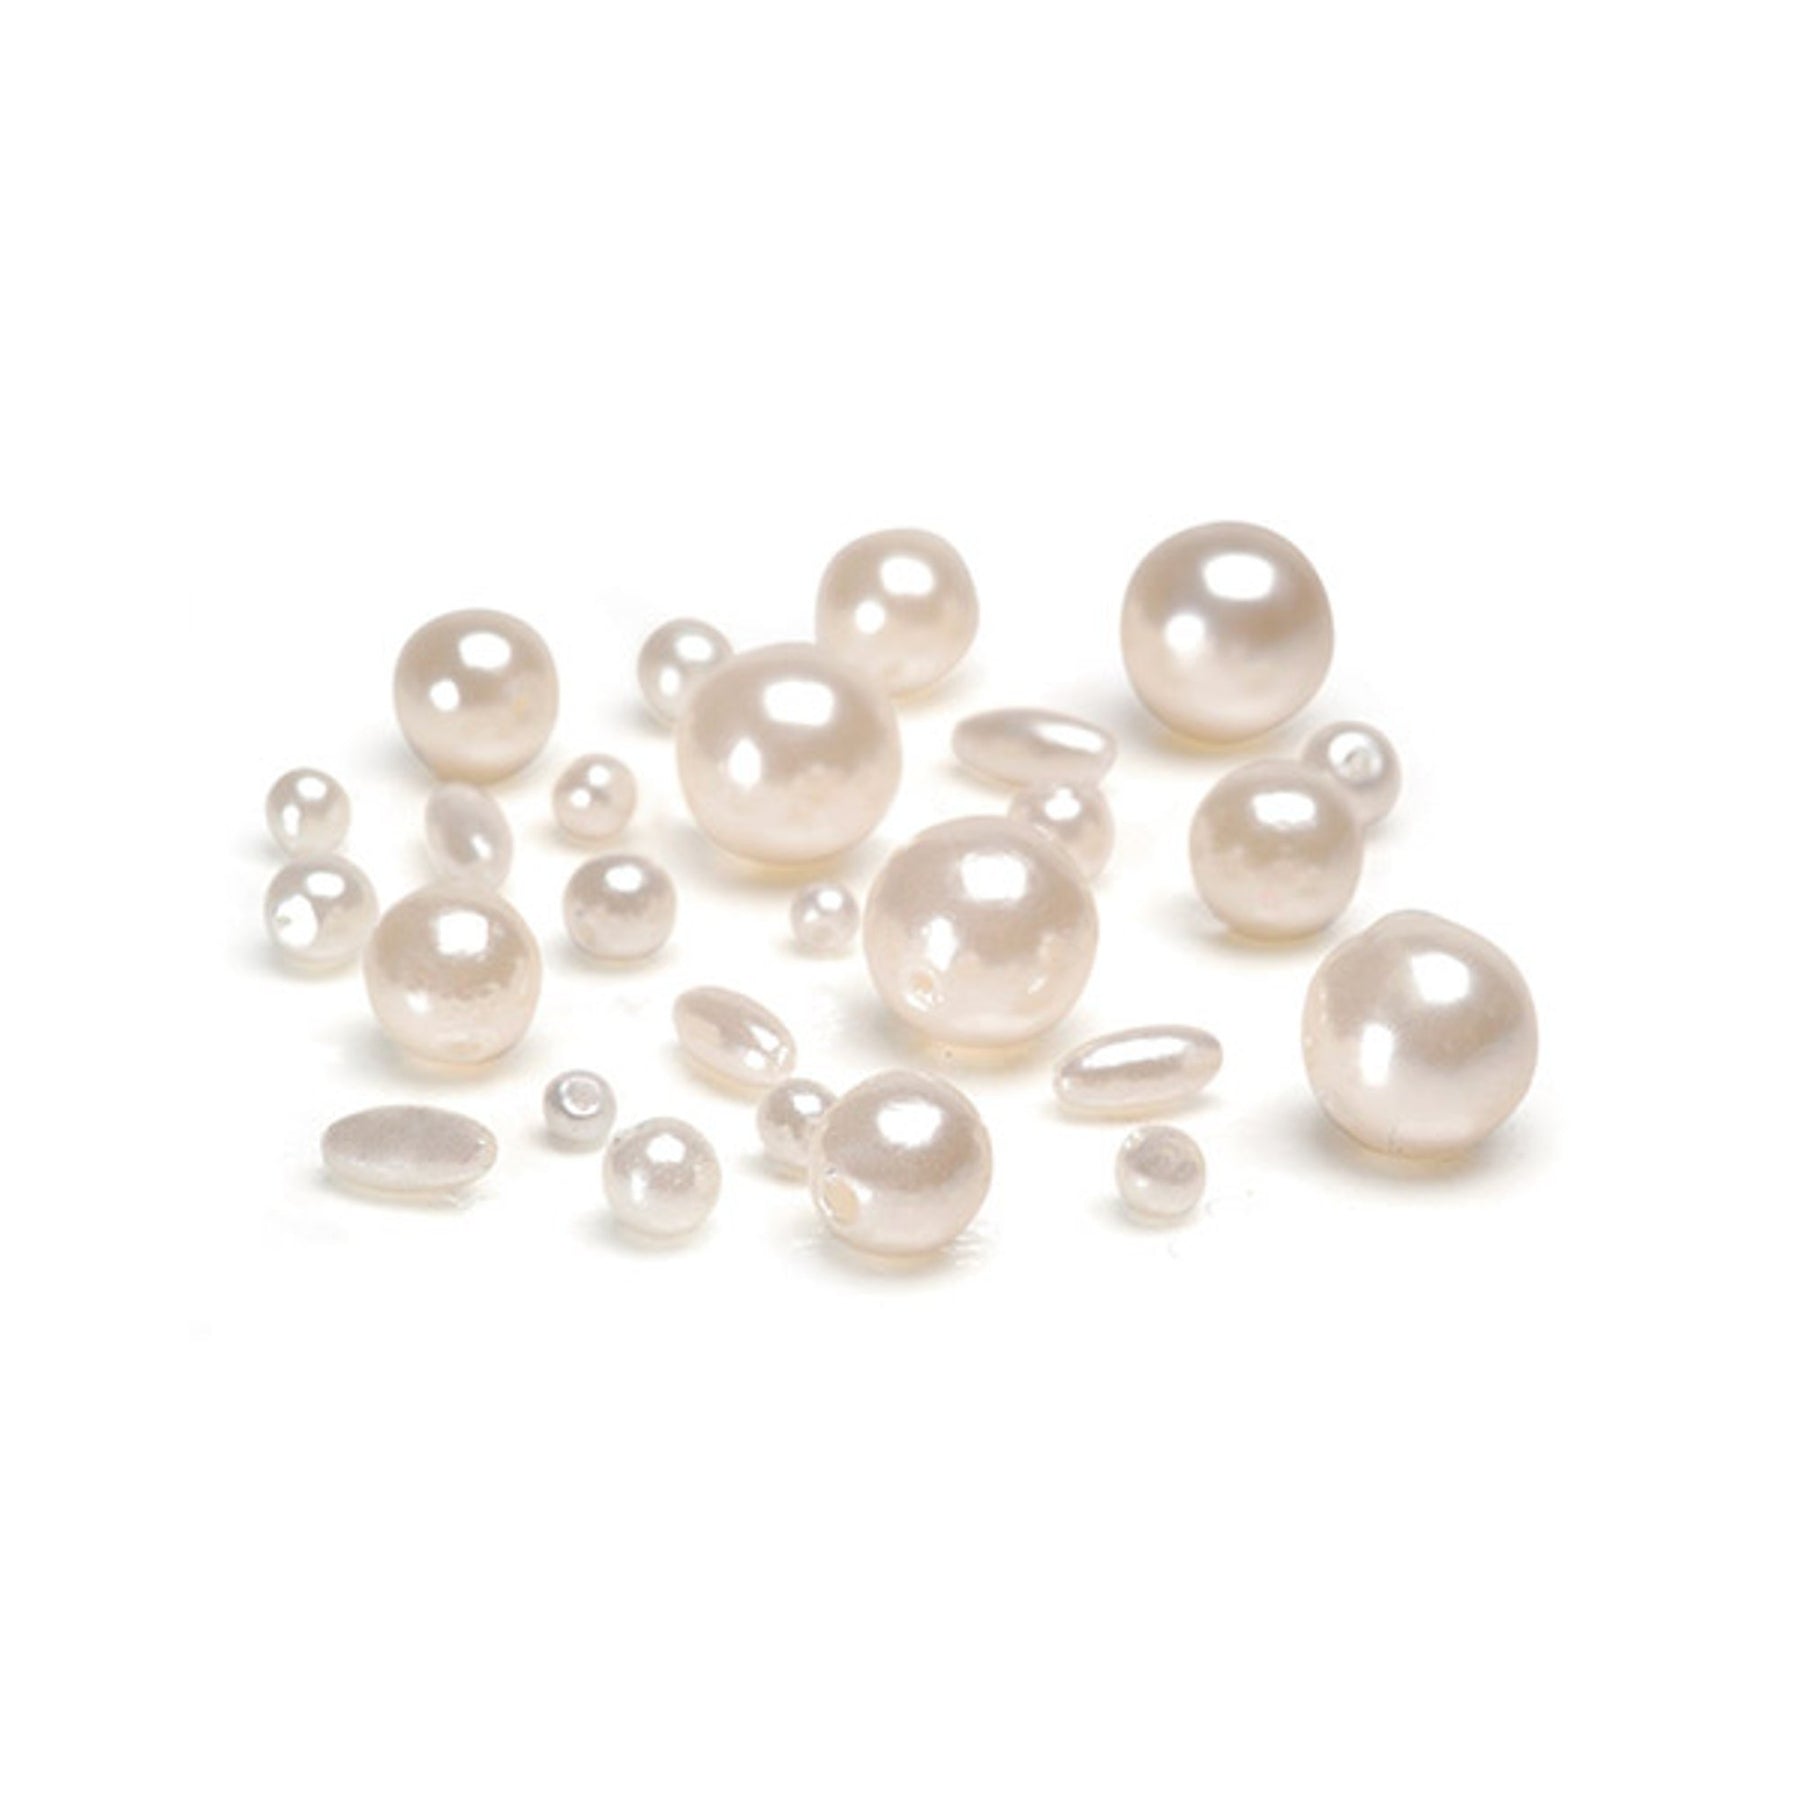 New - Assorted Pearl Beads